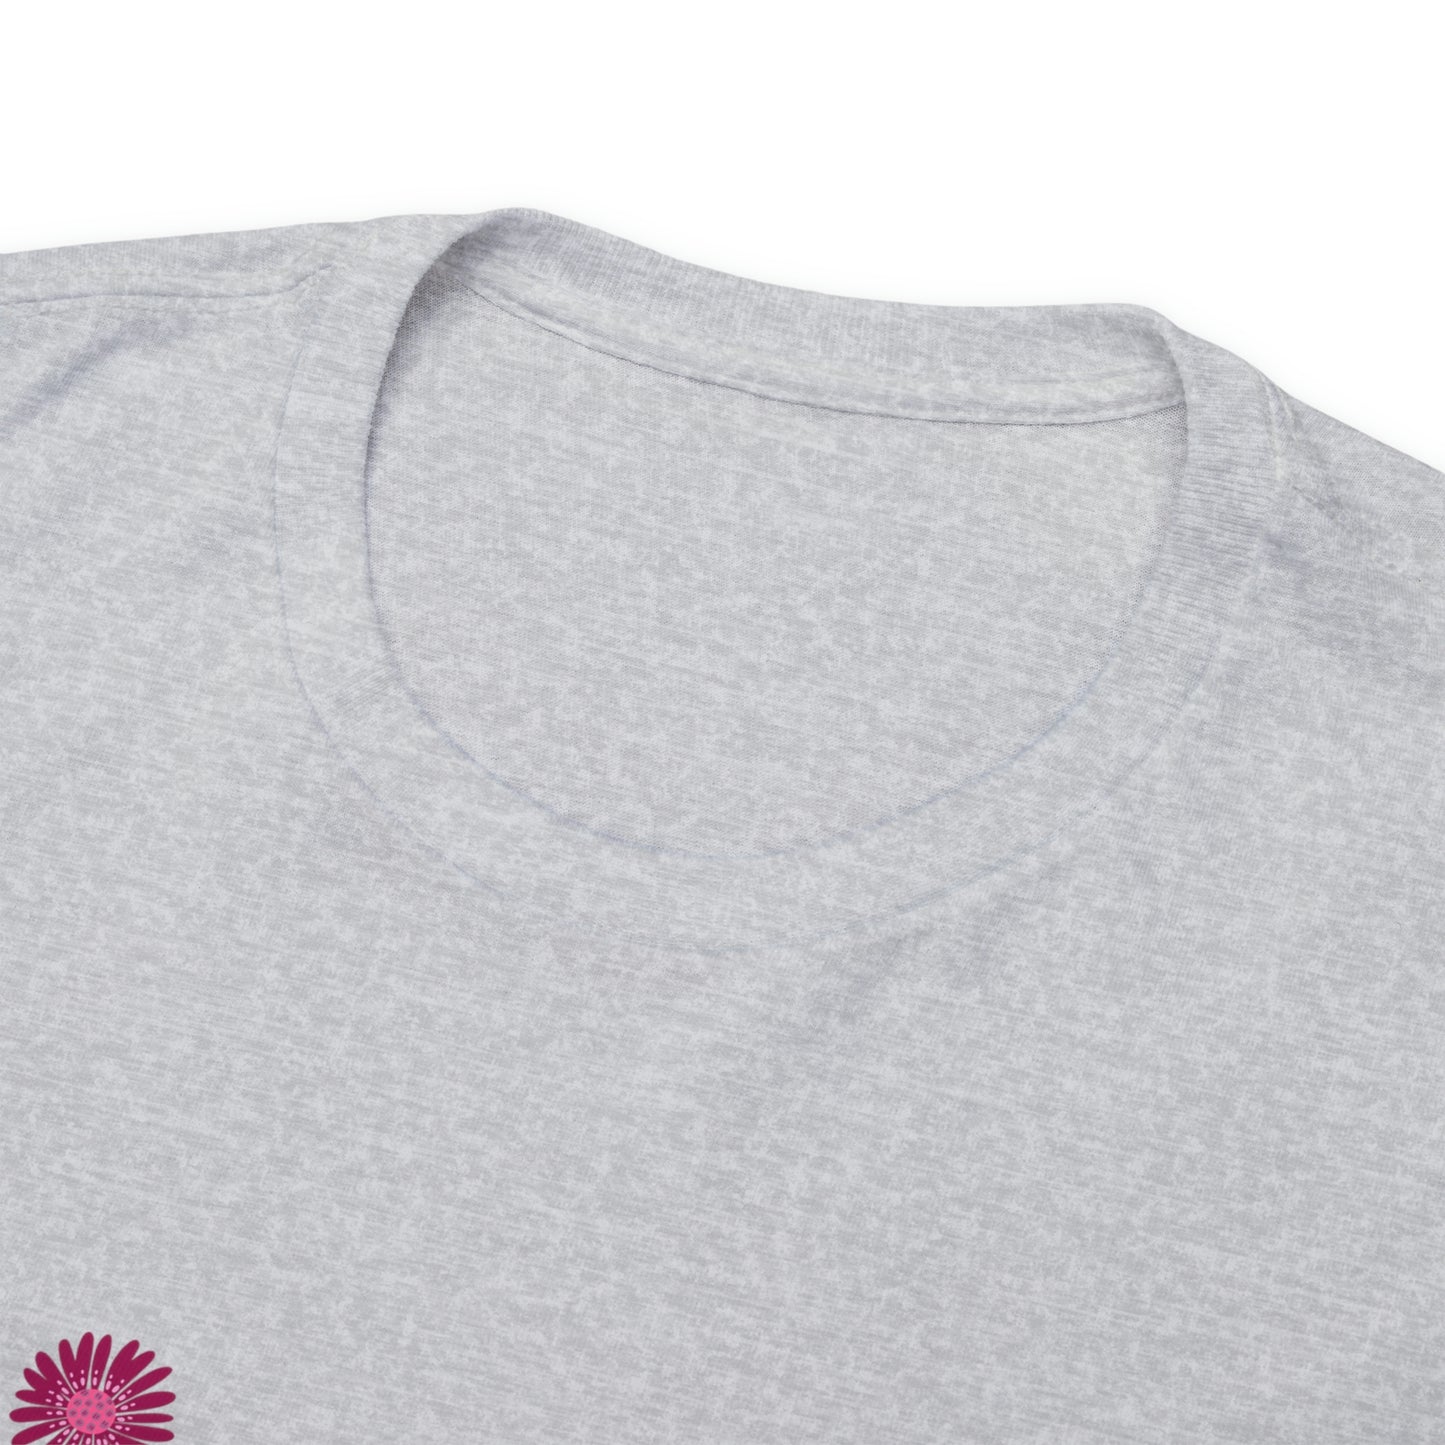 Close up of the front of the neck on a grey t-shirt